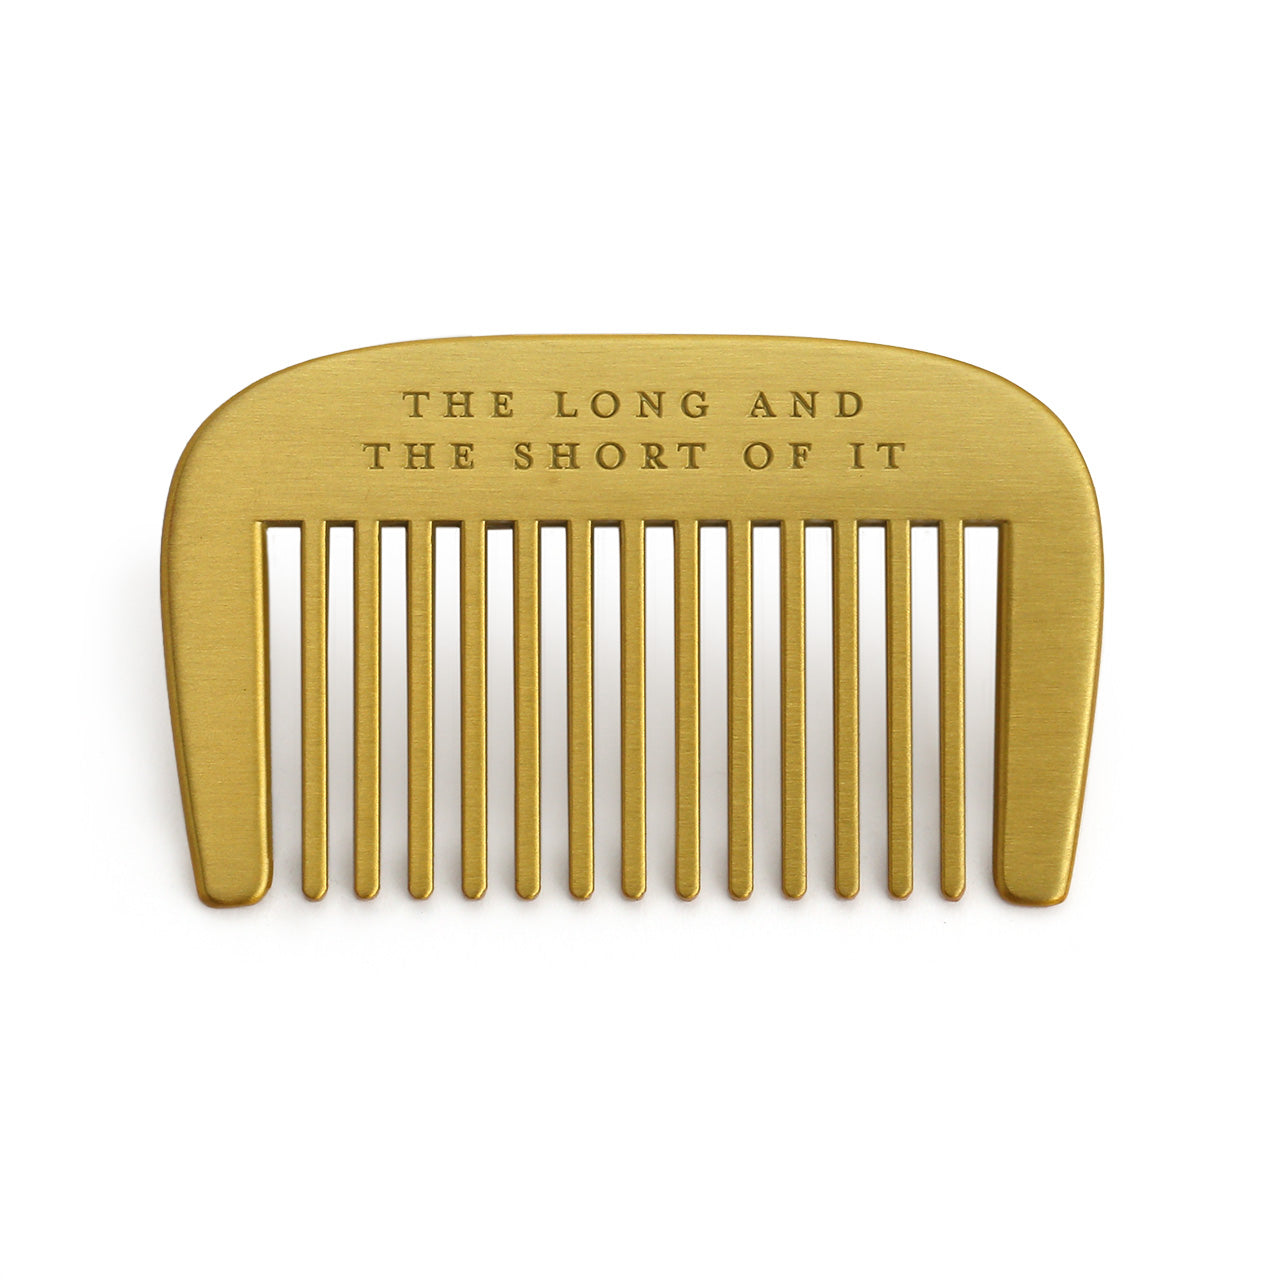 Short brass beard comb engraved with "the long and the short of it"